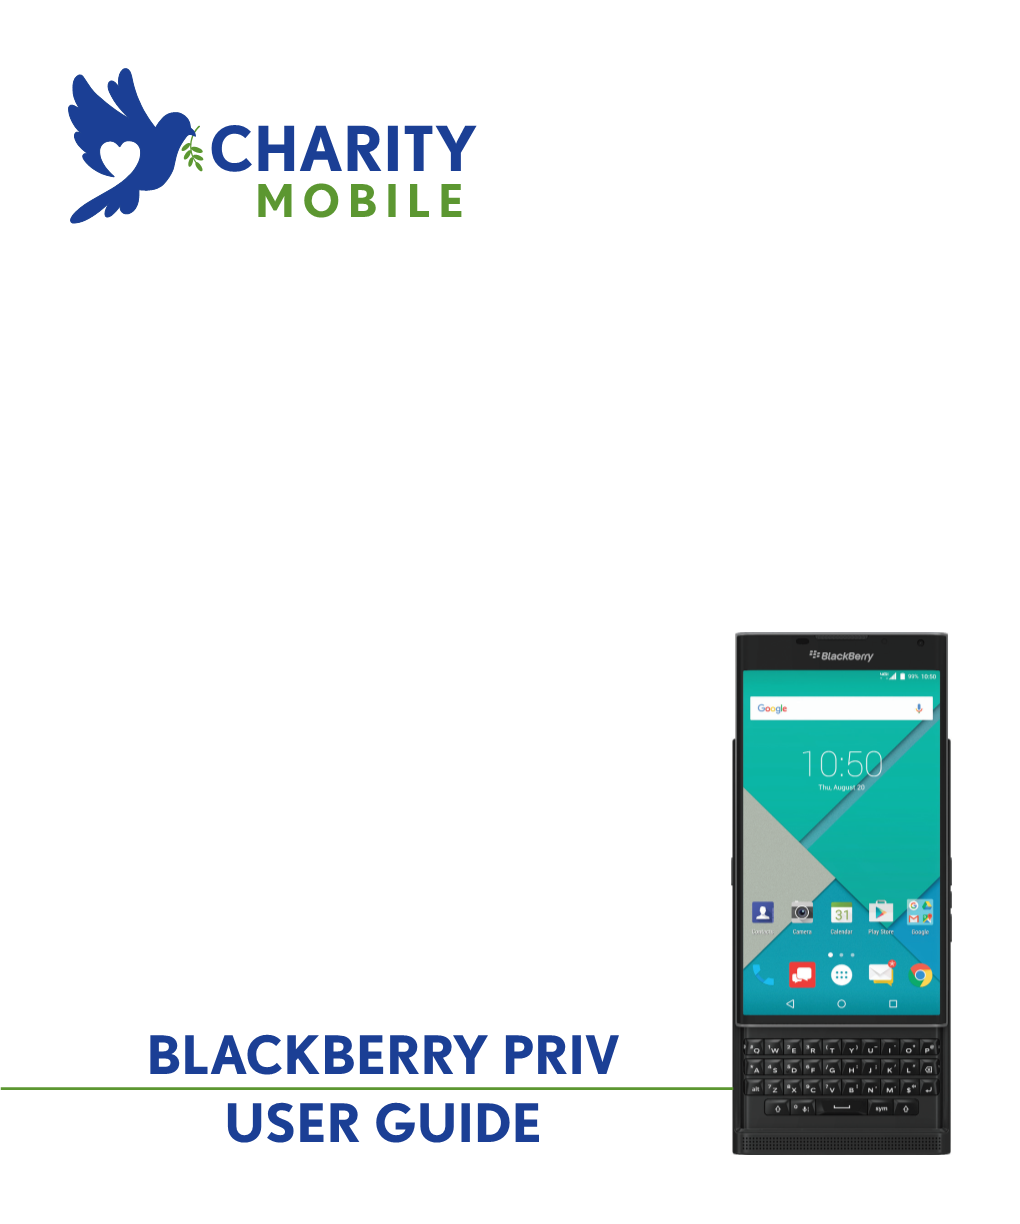 BLACKBERRY PRIV USER GUIDE Published: 2016-10-24 SWD-20161024141156031 Contents